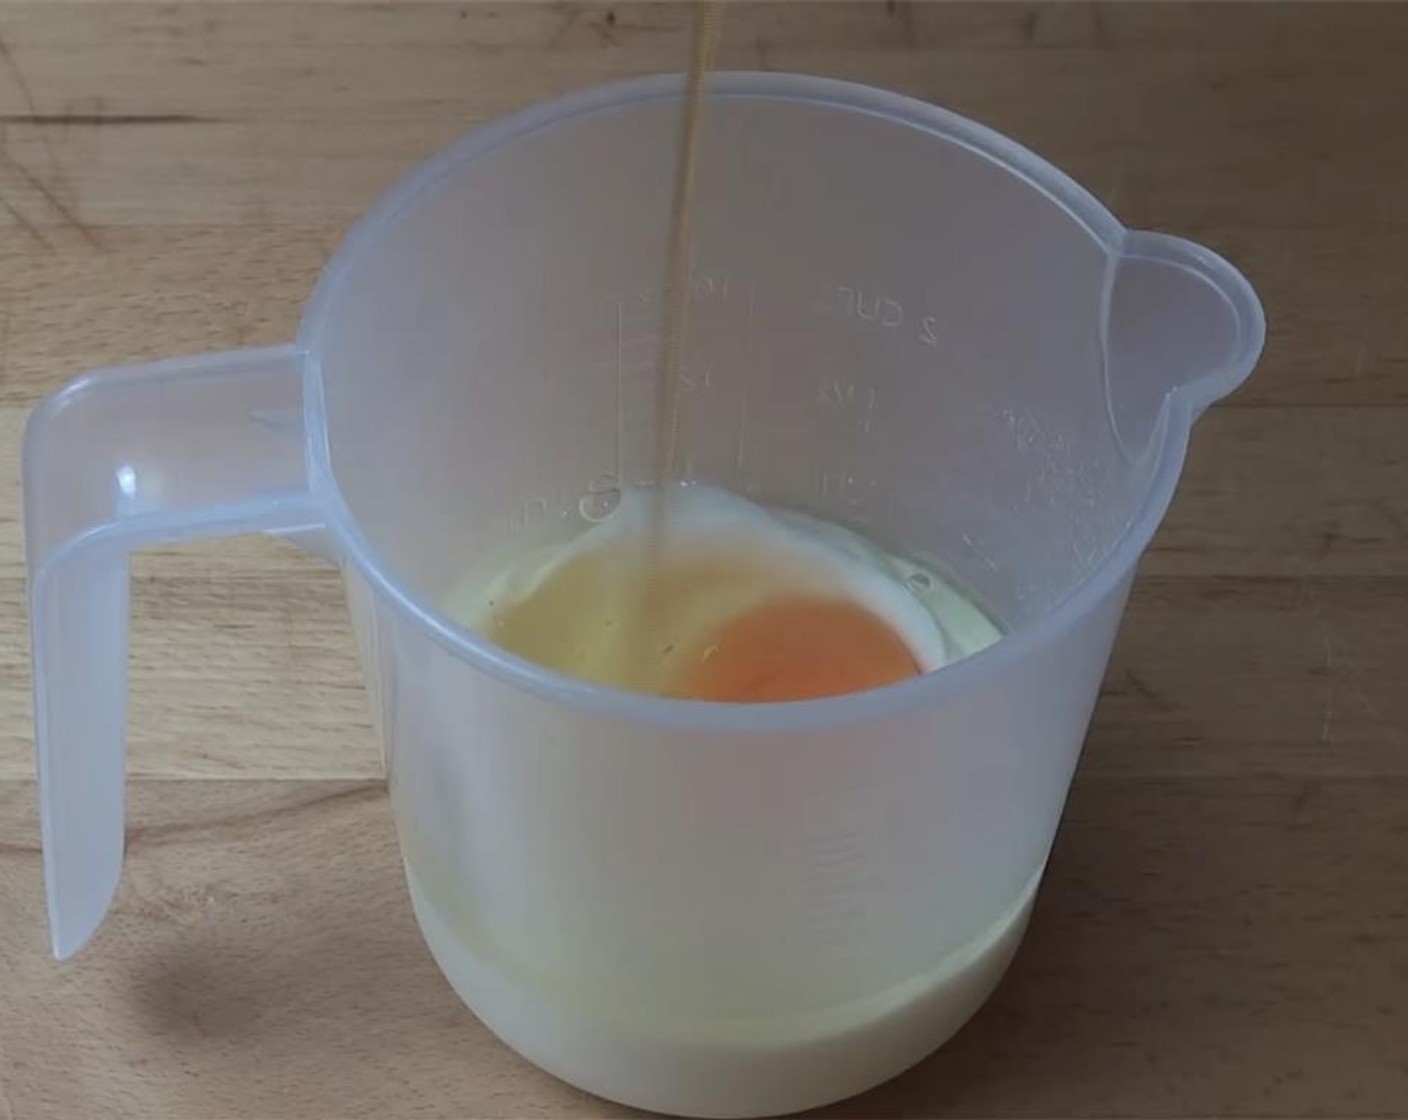 step 2 In a measuring cup, combine Low Fat Vanilla Yogurt (1/2 cup), Egg (1) and Vanilla Extract (1 tsp).